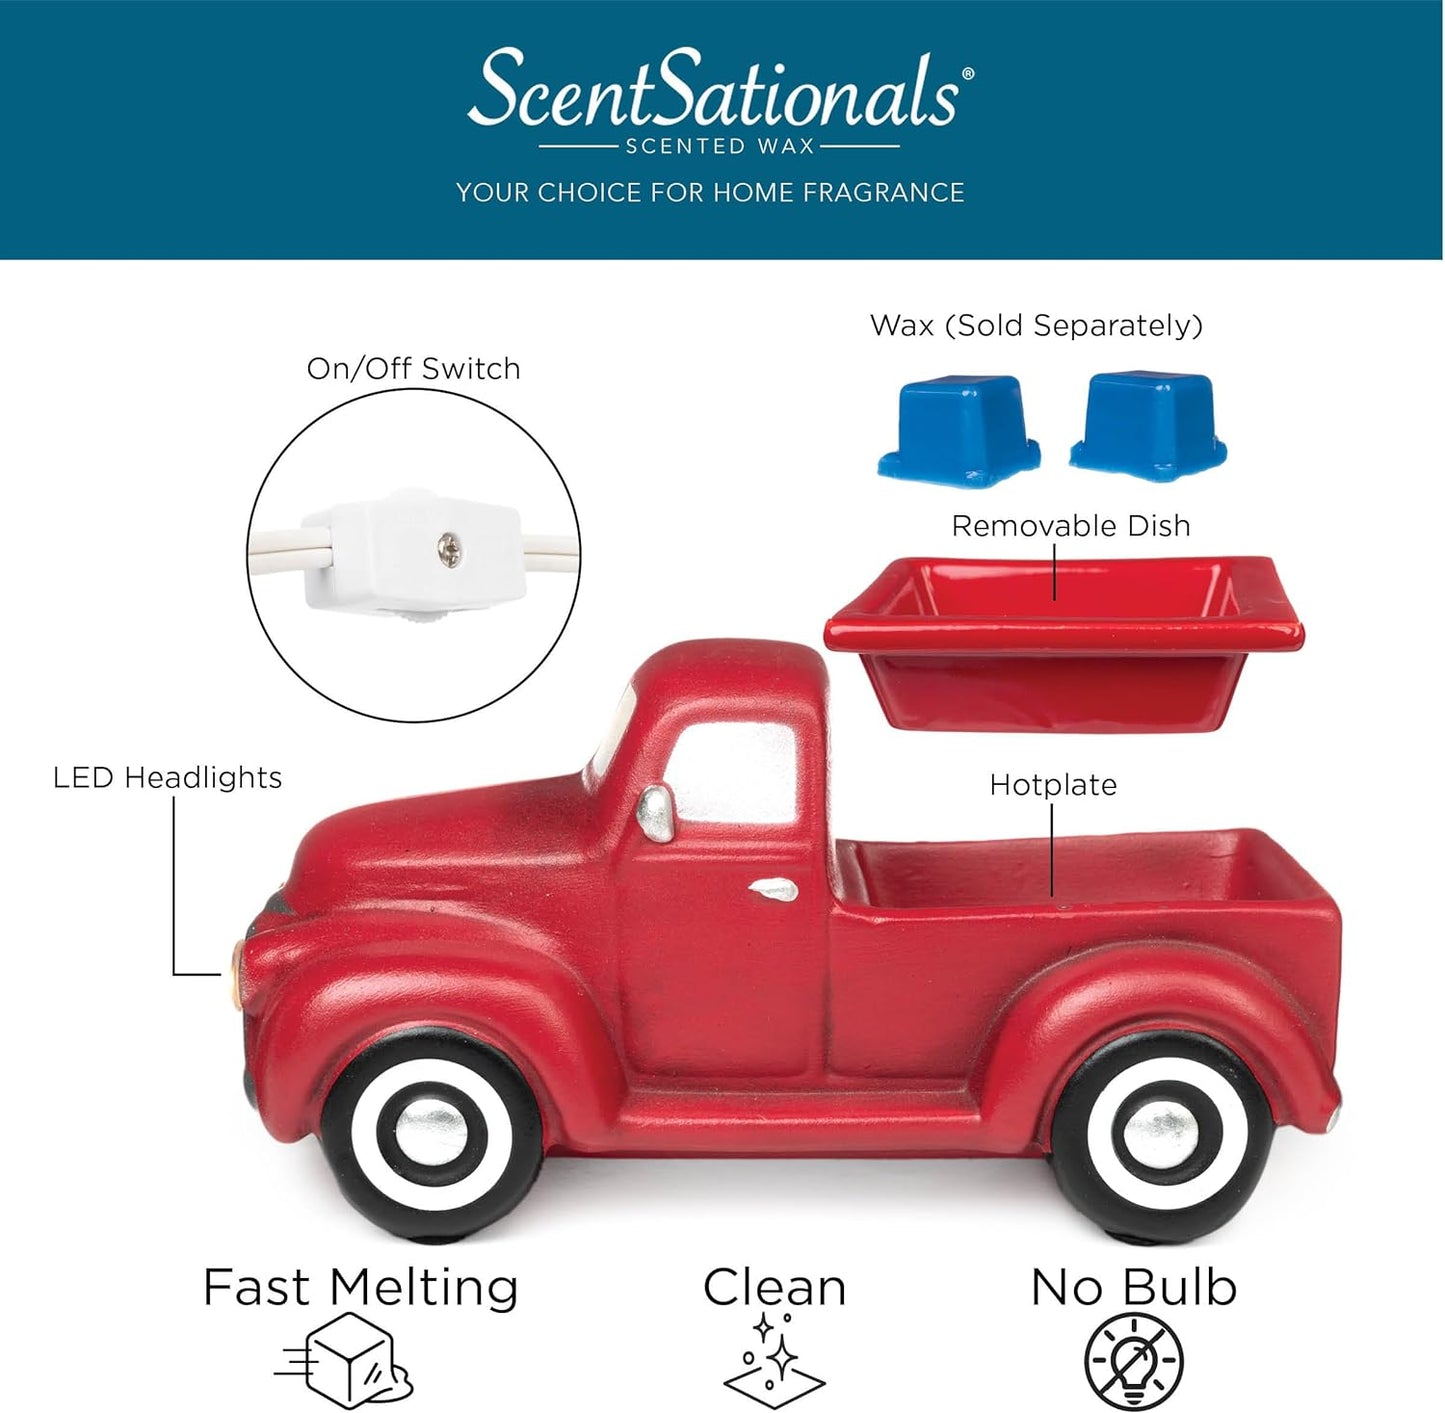 Scentsationals Truck Collection - Scented Wax Warmer - Travel Wax Cube Melter & Burner - Electric Fragrance Home Air Freshener Gift (Red)